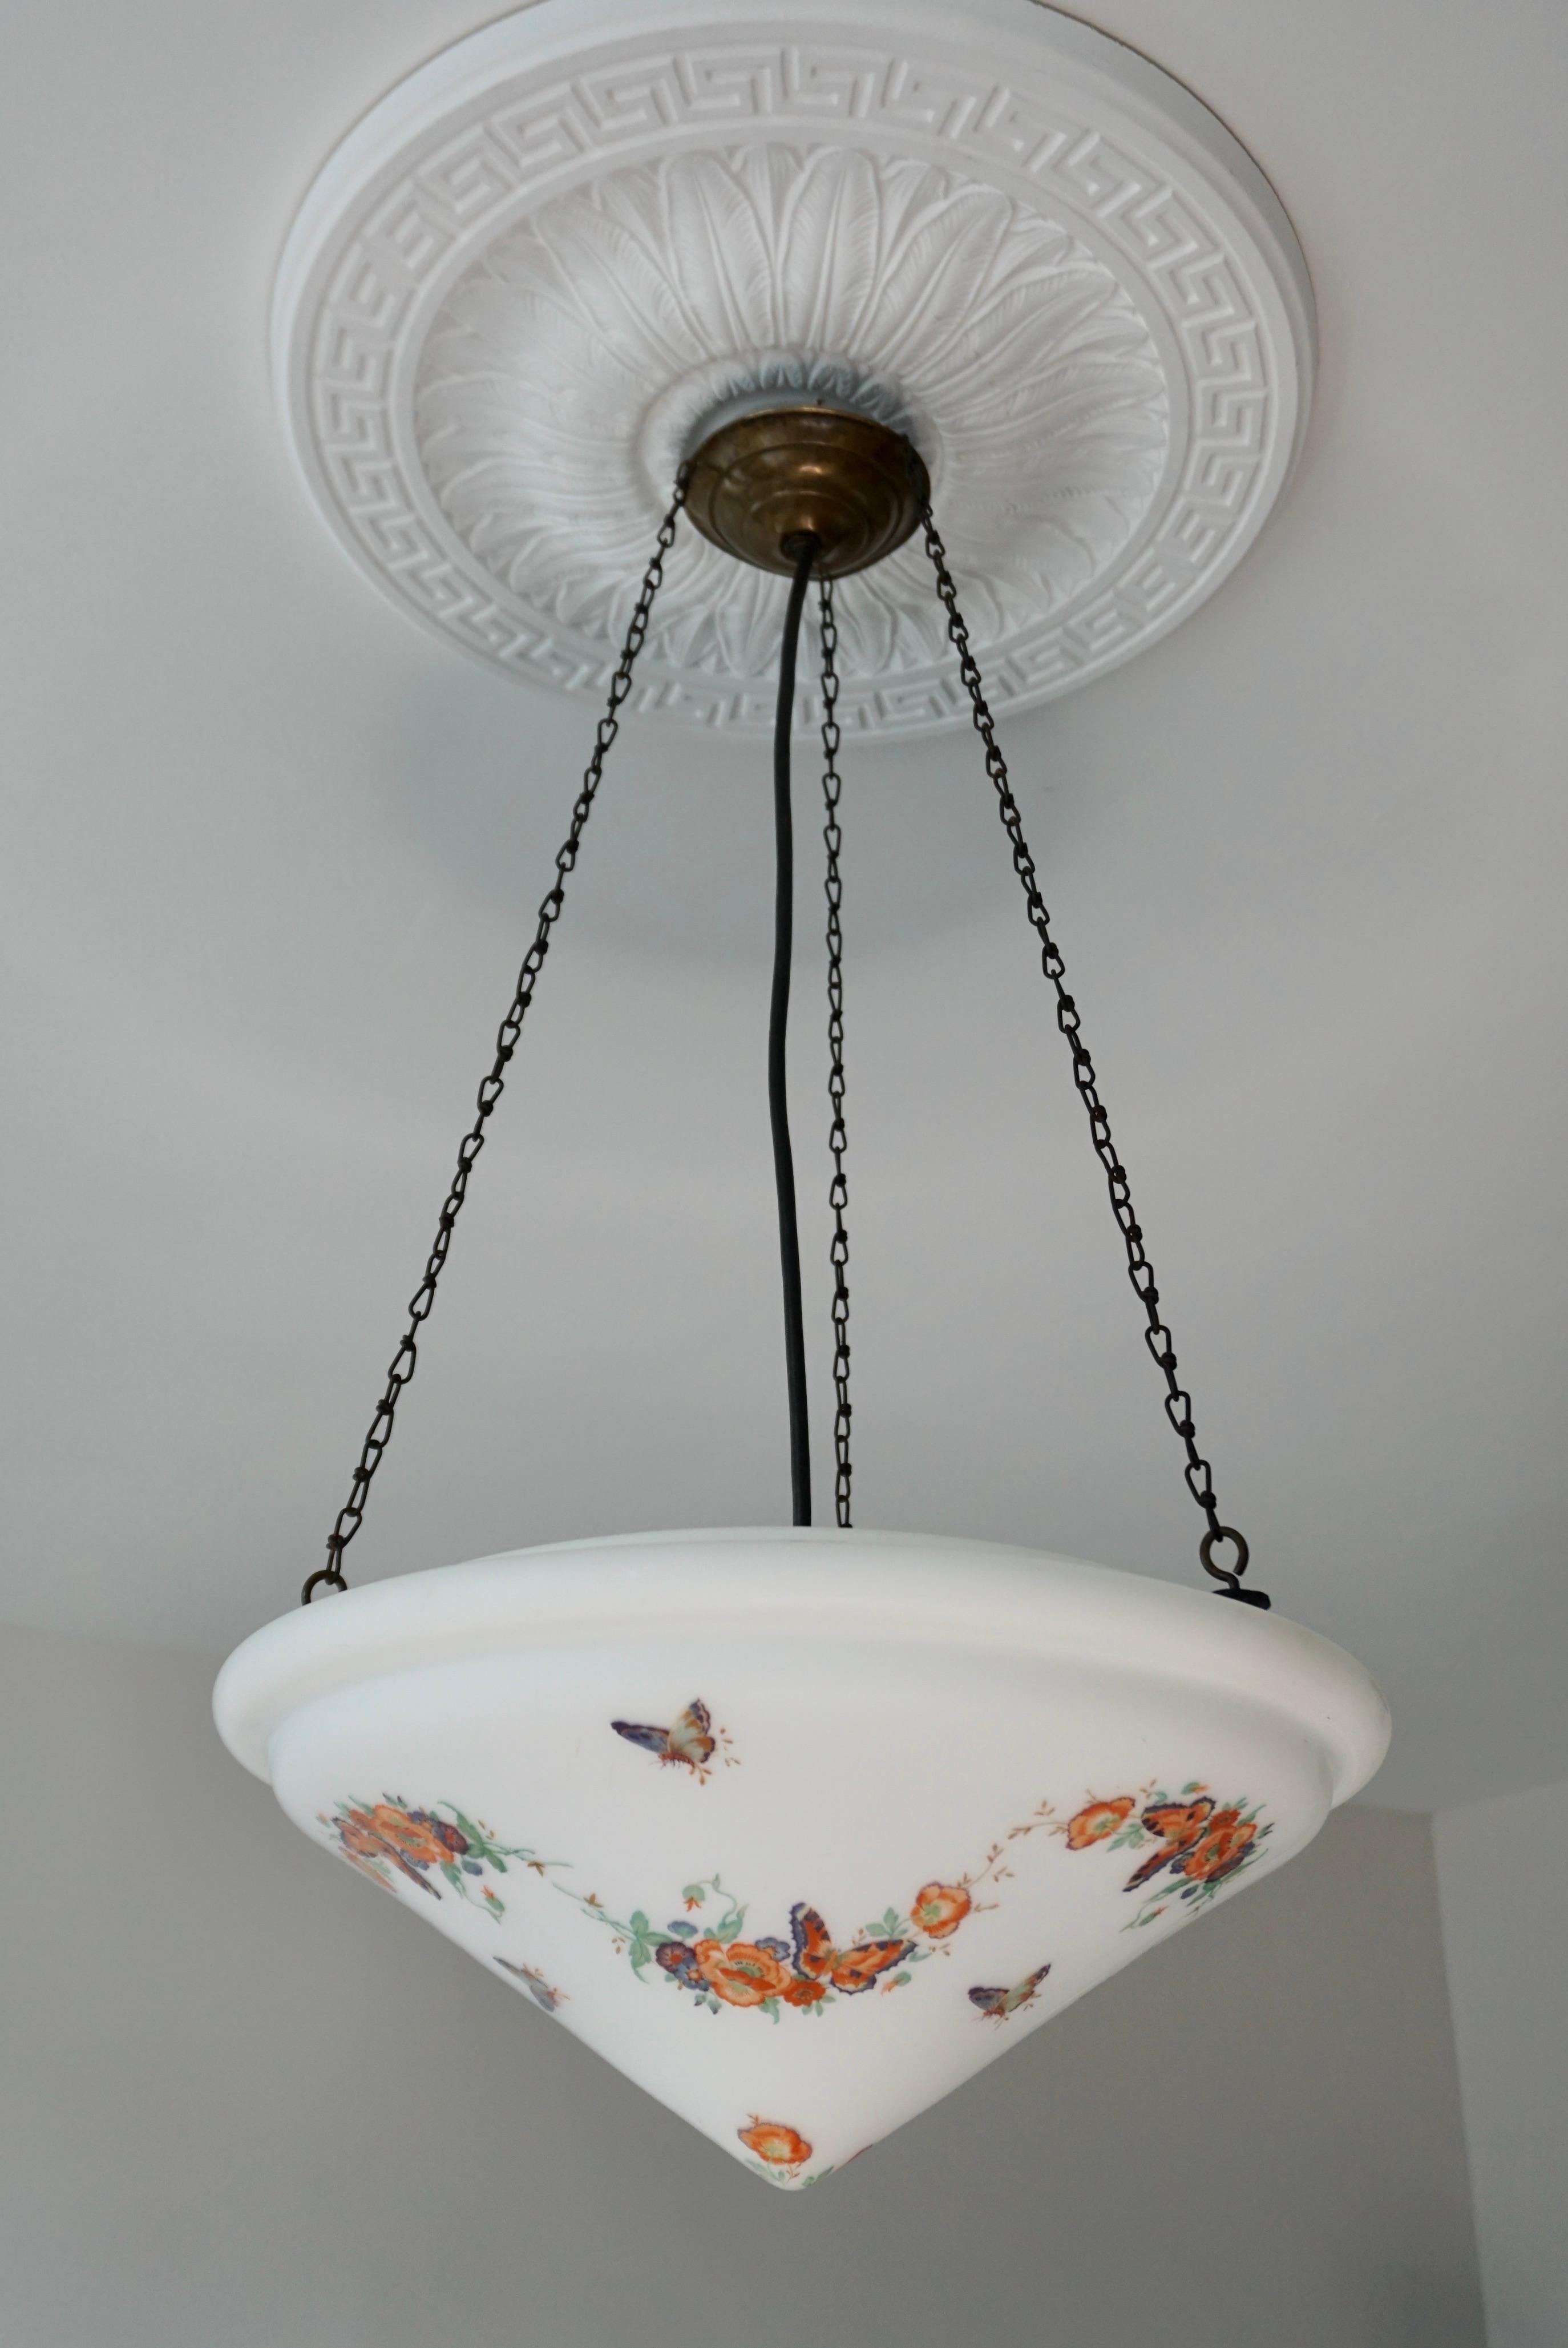 Early 20th Century Art Deco Pendant Light with Floral Motifs and Butterflies